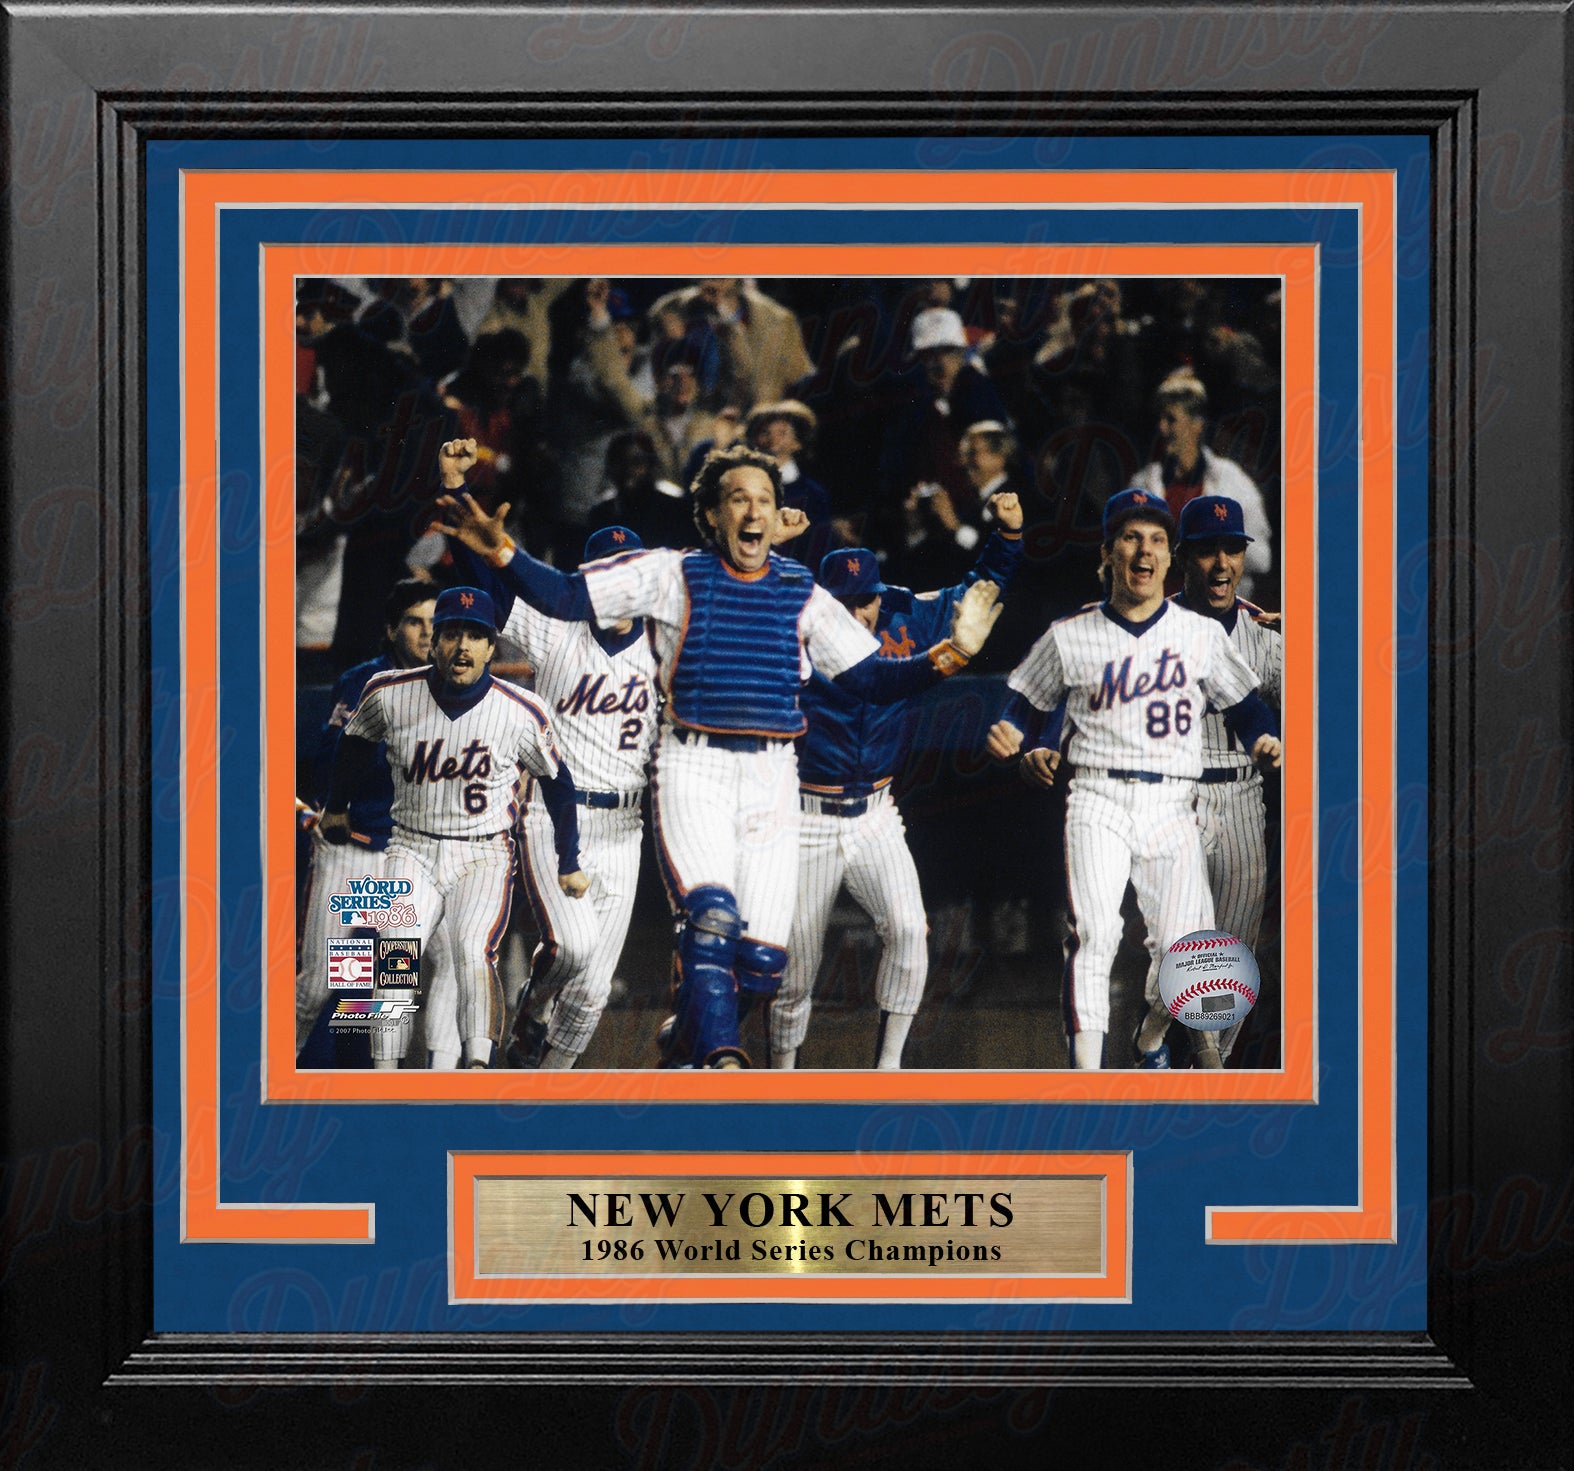  1986 Mets World Series Champions 2 Card Collector Plaque #1  w/8x10 Color Photo : Sports & Outdoors